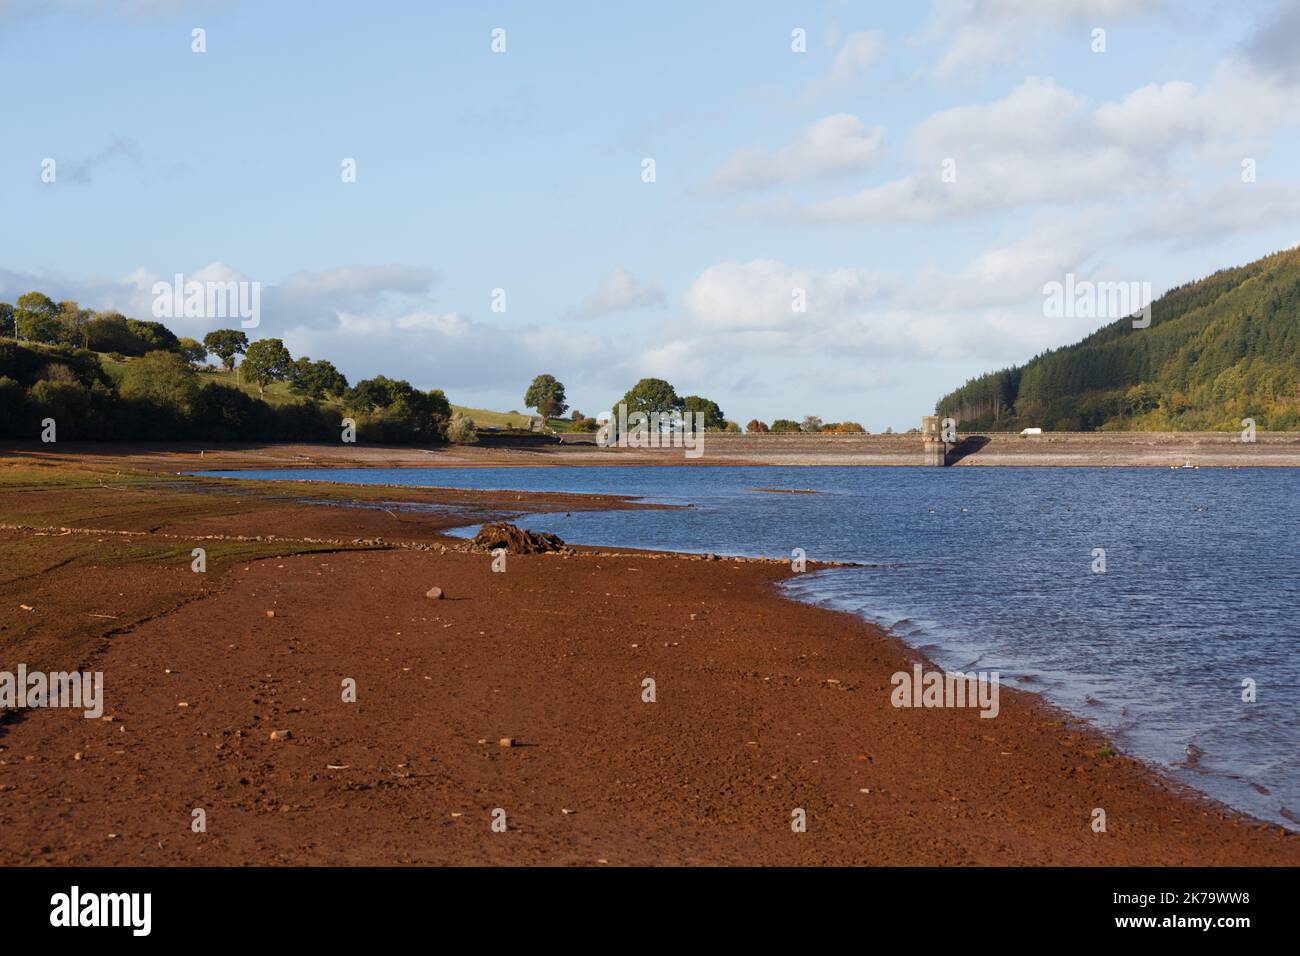 Talybont reservoir, South Wales, UK.  17 October '22.  UK weather: A sunny afternoon at the reservoir.  Water levels still low following the summer heatwave.  Credit: Andrew Bartlett/Alamy Live News. Stock Photo